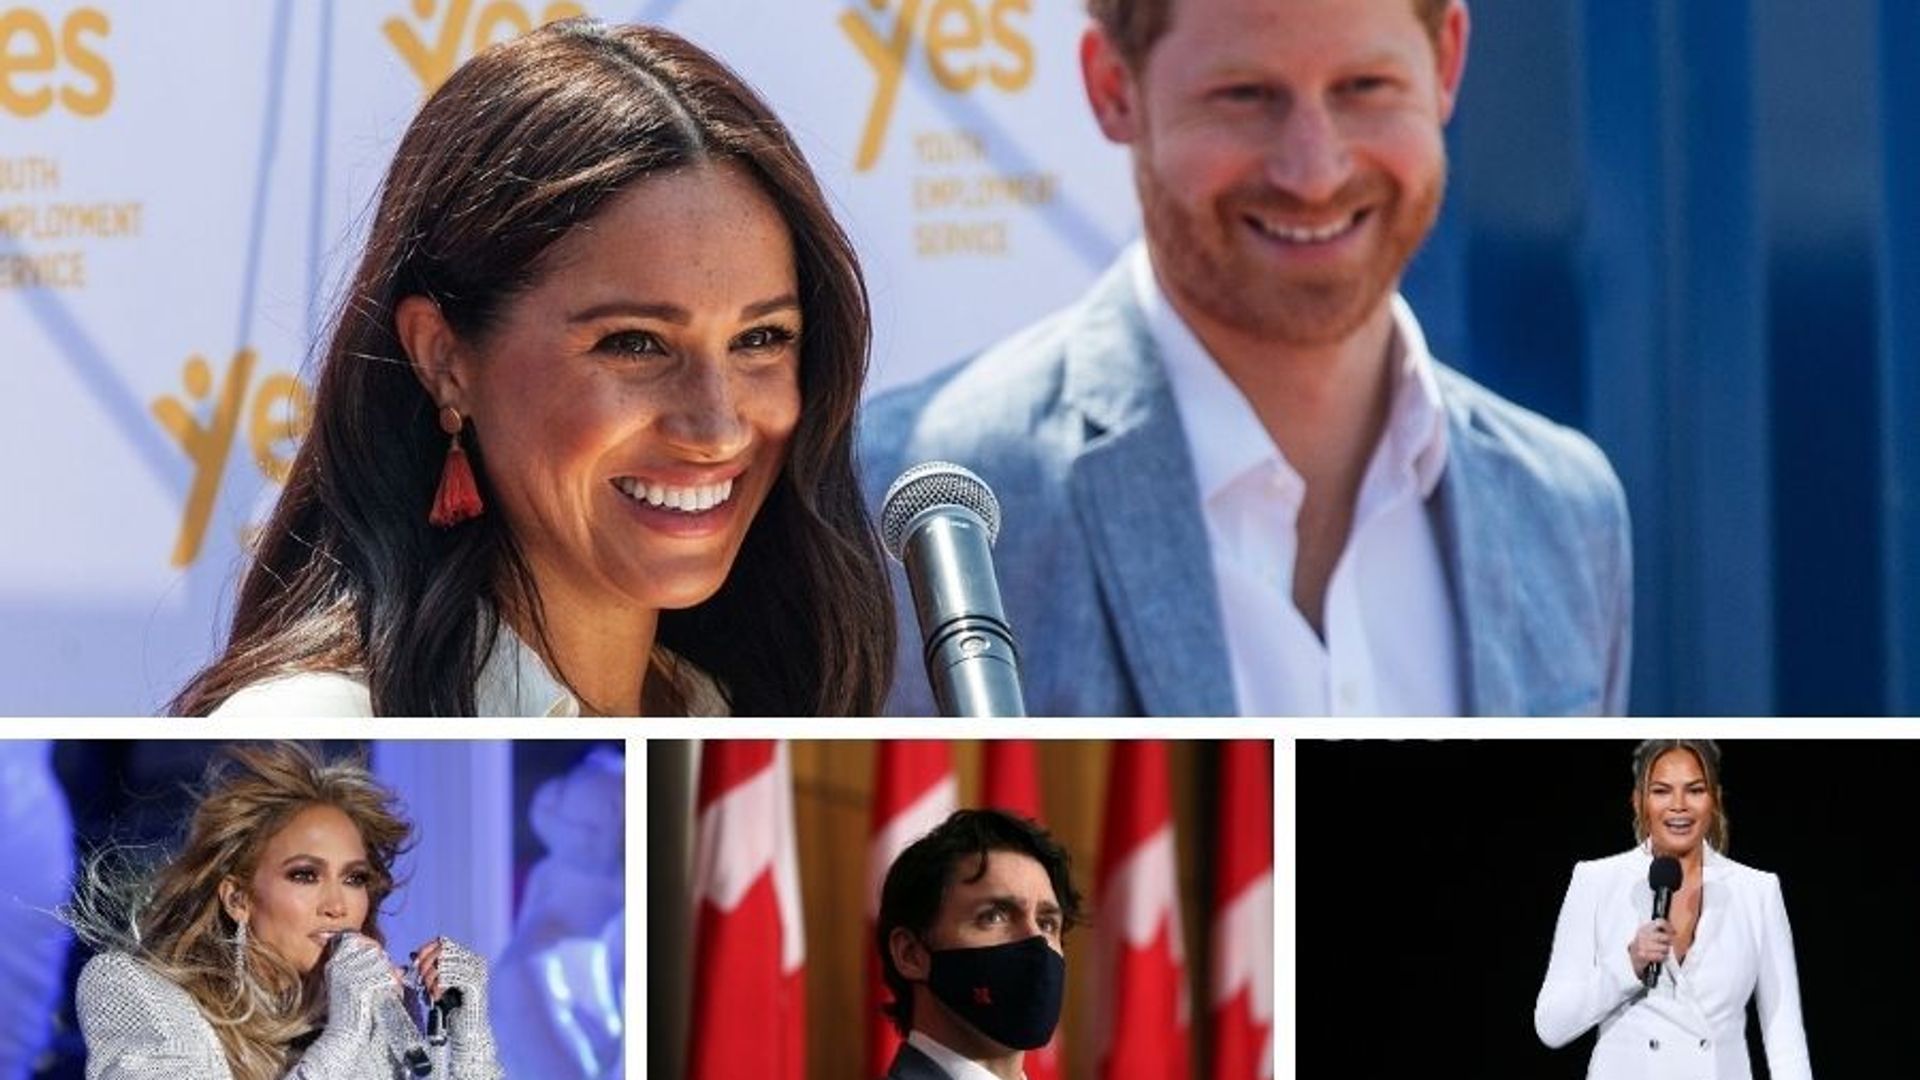 Prince Harry and Duchess Meghan join star-studded concert in support of vaccine equity